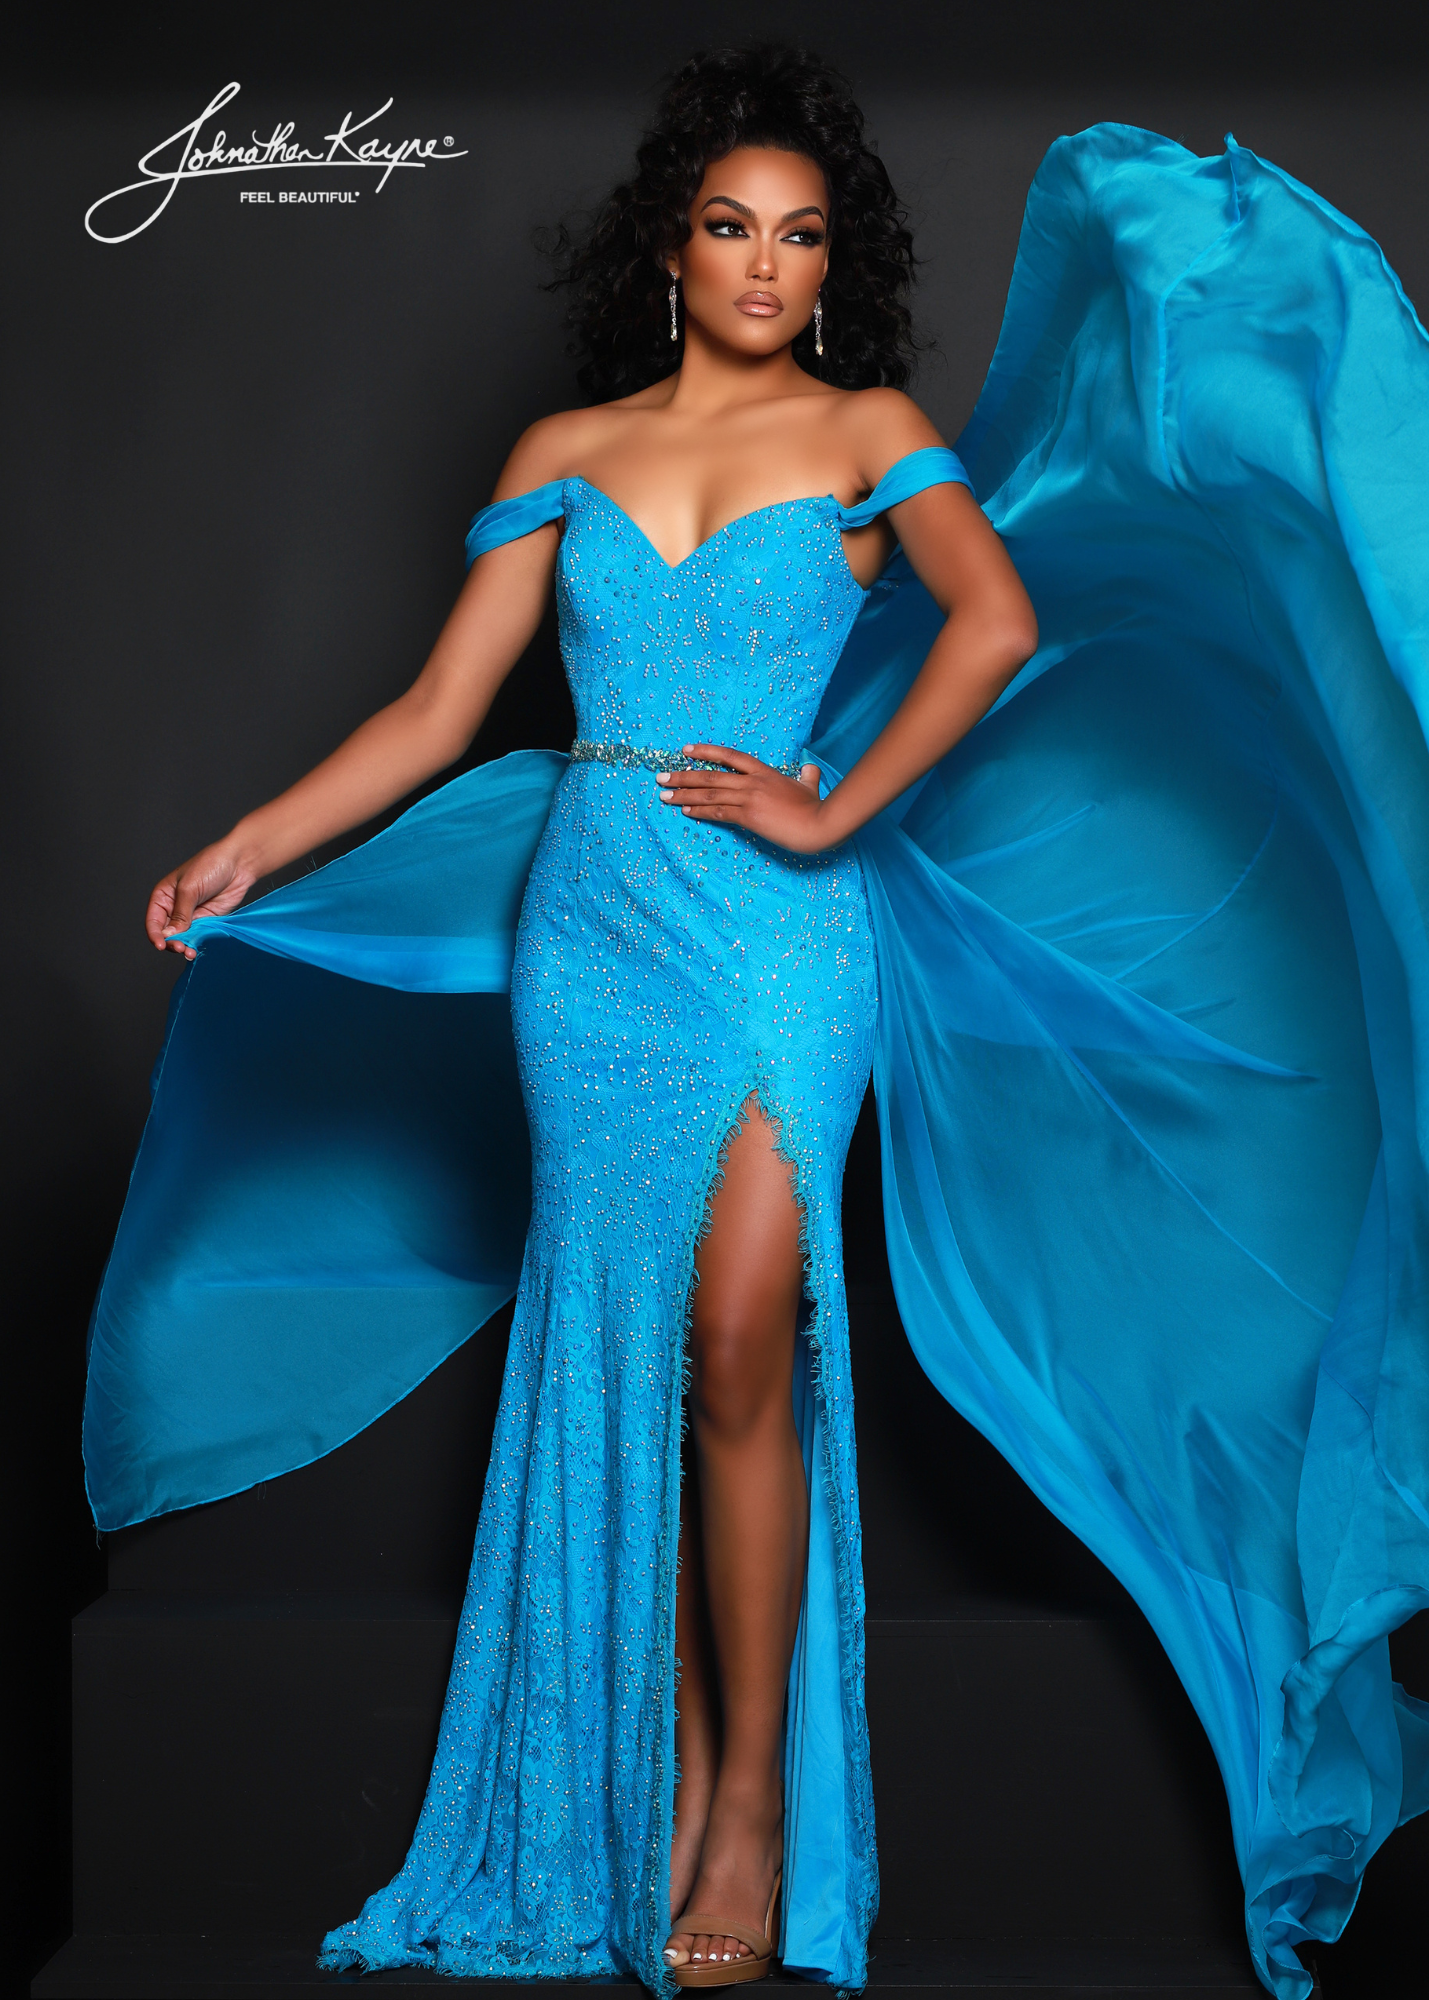 Johnathan Kayne 2715 Long Fitted Lace Pageant Dress Overskirt Slit Prom Gown off the Shoulder Dress up and show up in this chic stretch lace off-the-shoulder gown. The beaded belt that highlights your waist features an overskirt to give you that extra touch.  Colors: Black-Nude, Coral, Royal, Turquoise, White  Sizes: 00, 0, 2, 4, 6, 8, 10, 12, 14, 16, 18, 20  Fabric Stretch Lace, Stretch Lining, Chiffon